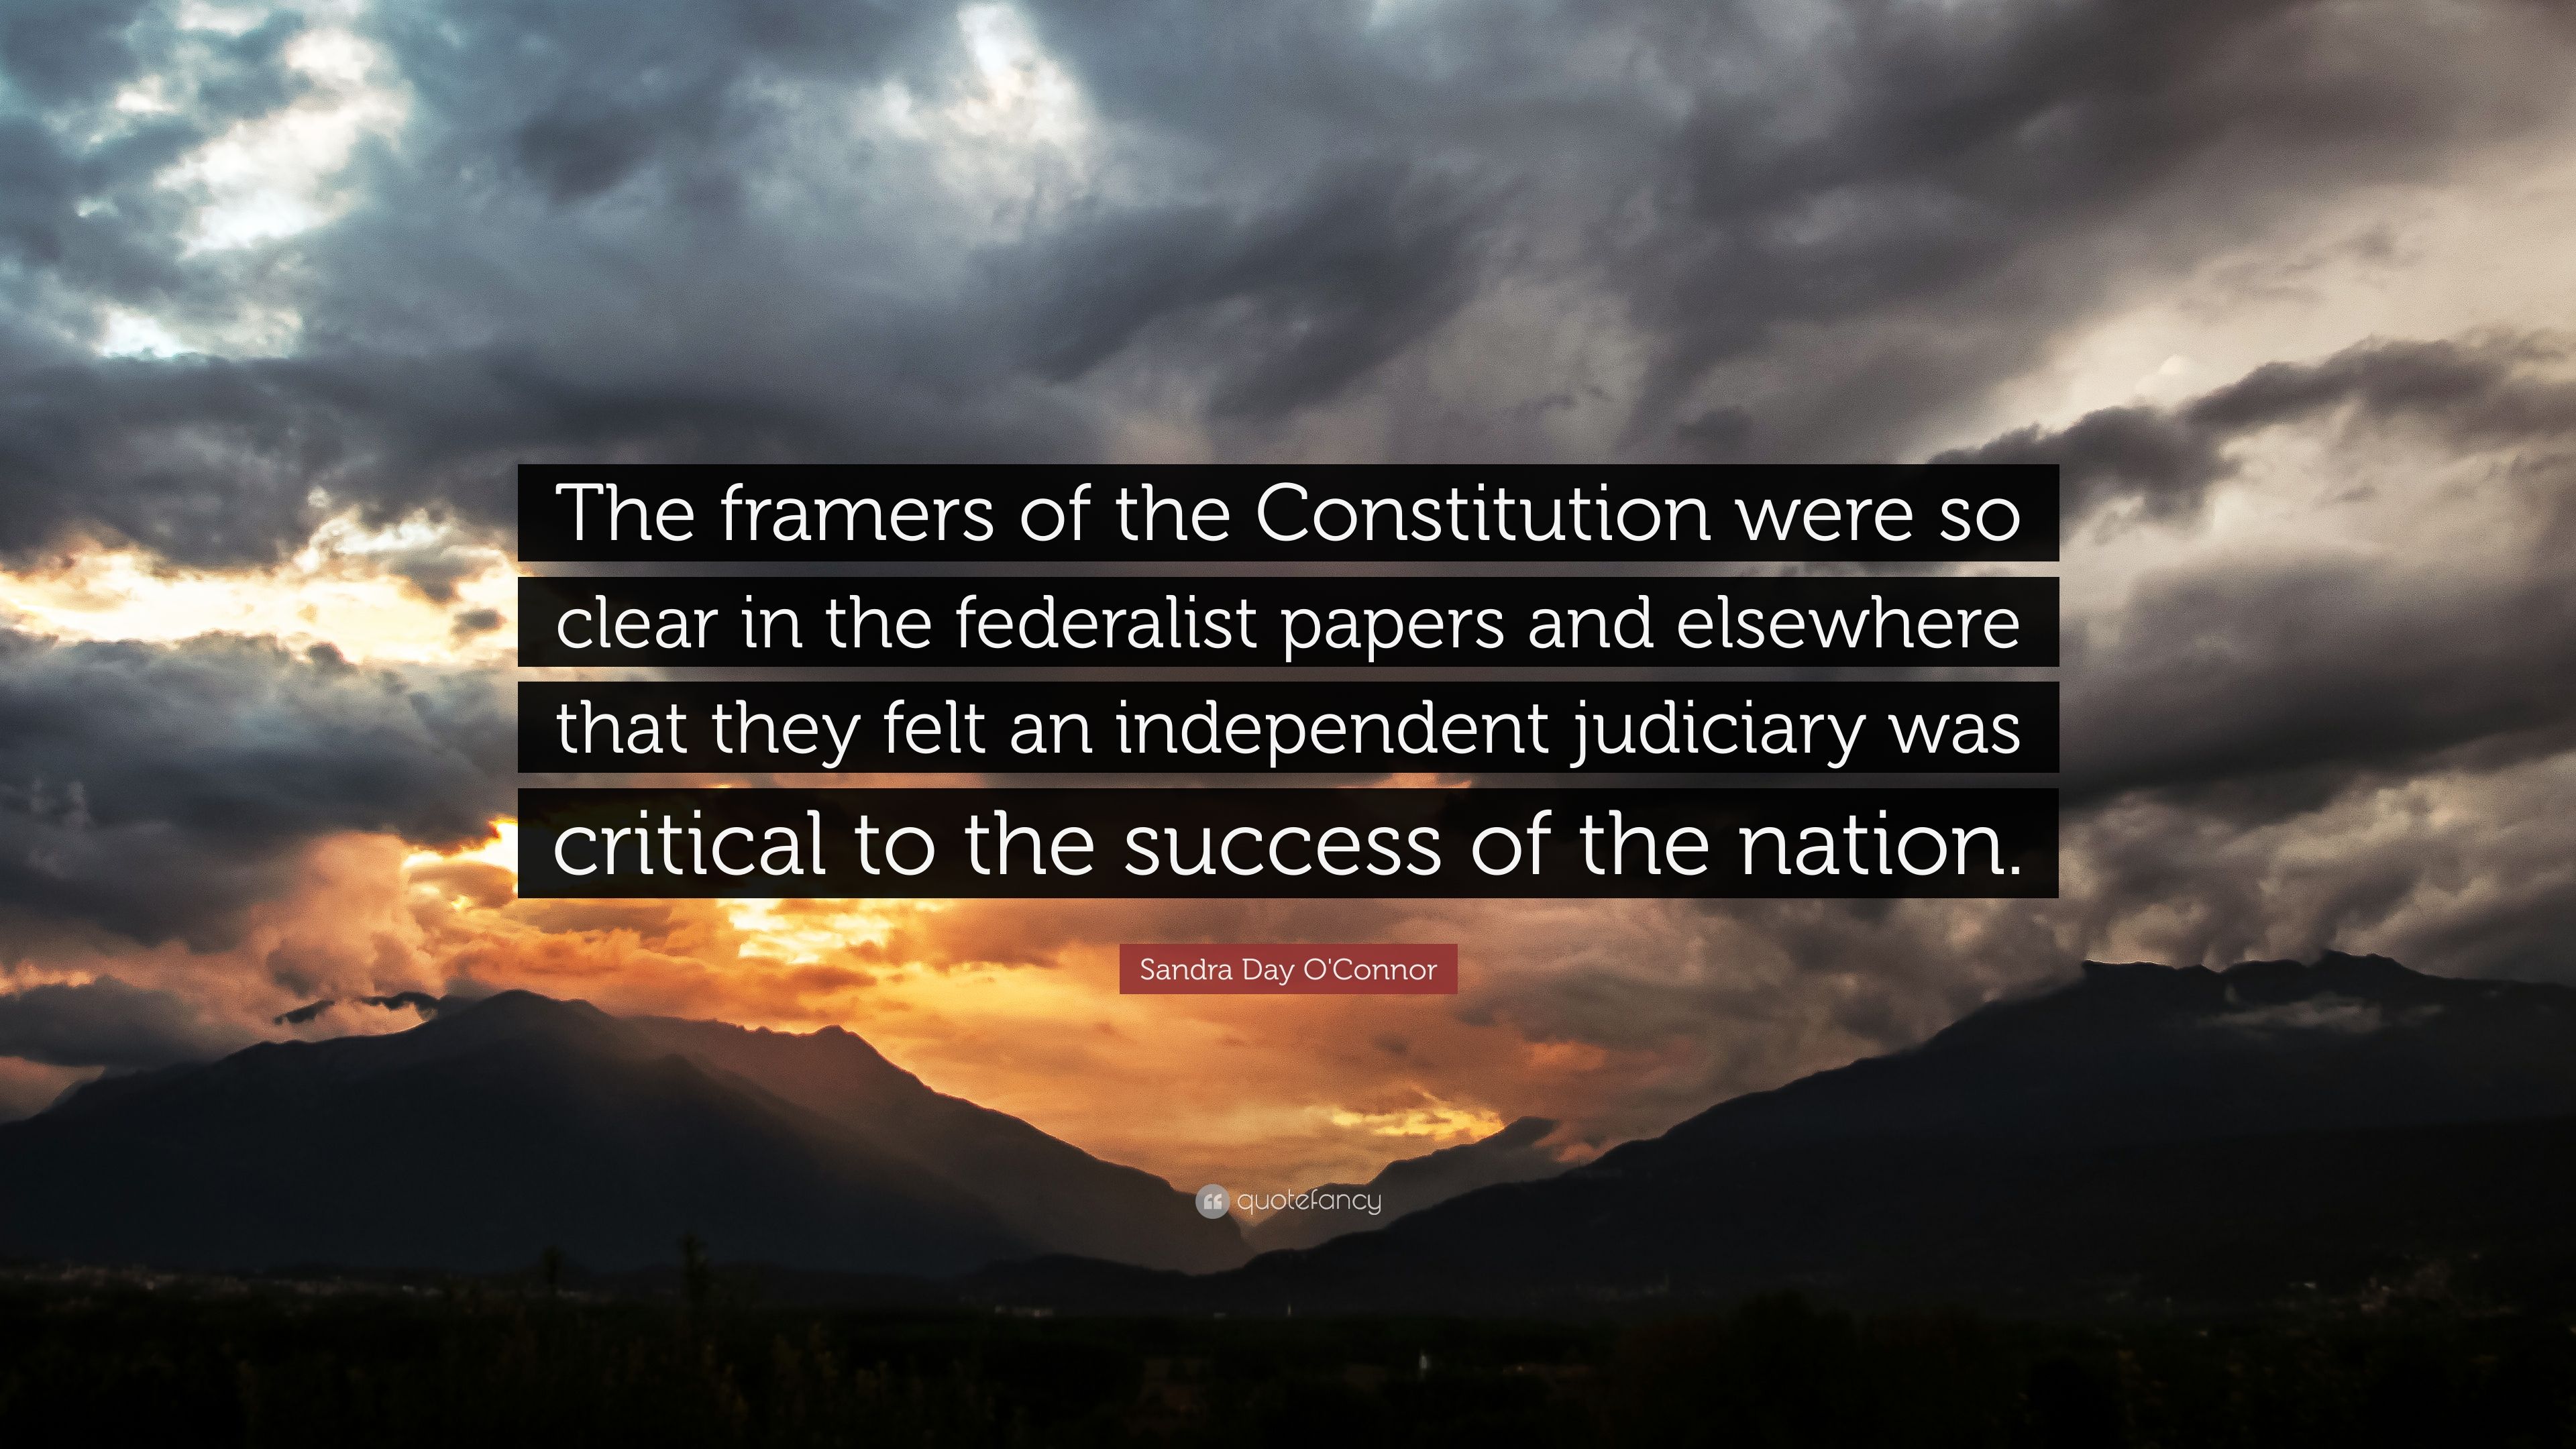 Sandra Day O'Connor Quote: “The framers of the Constitution were so clear in the federalist papers and elsewhere that they felt an independent judic.” (7 wallpaper)